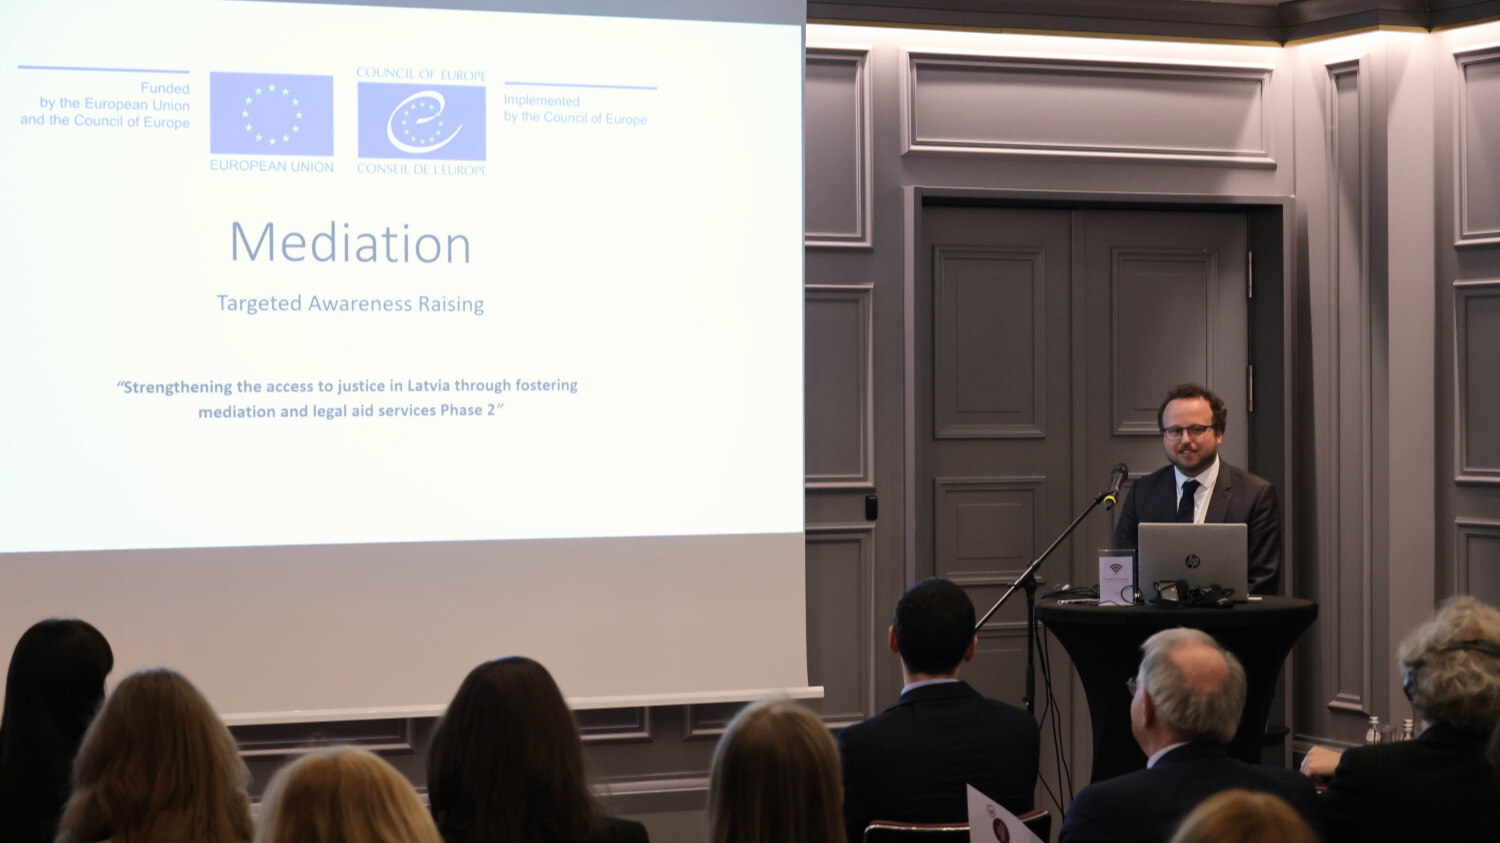 Closing event for the Council of Europe / European Union co-operation project on legal aid and mediation